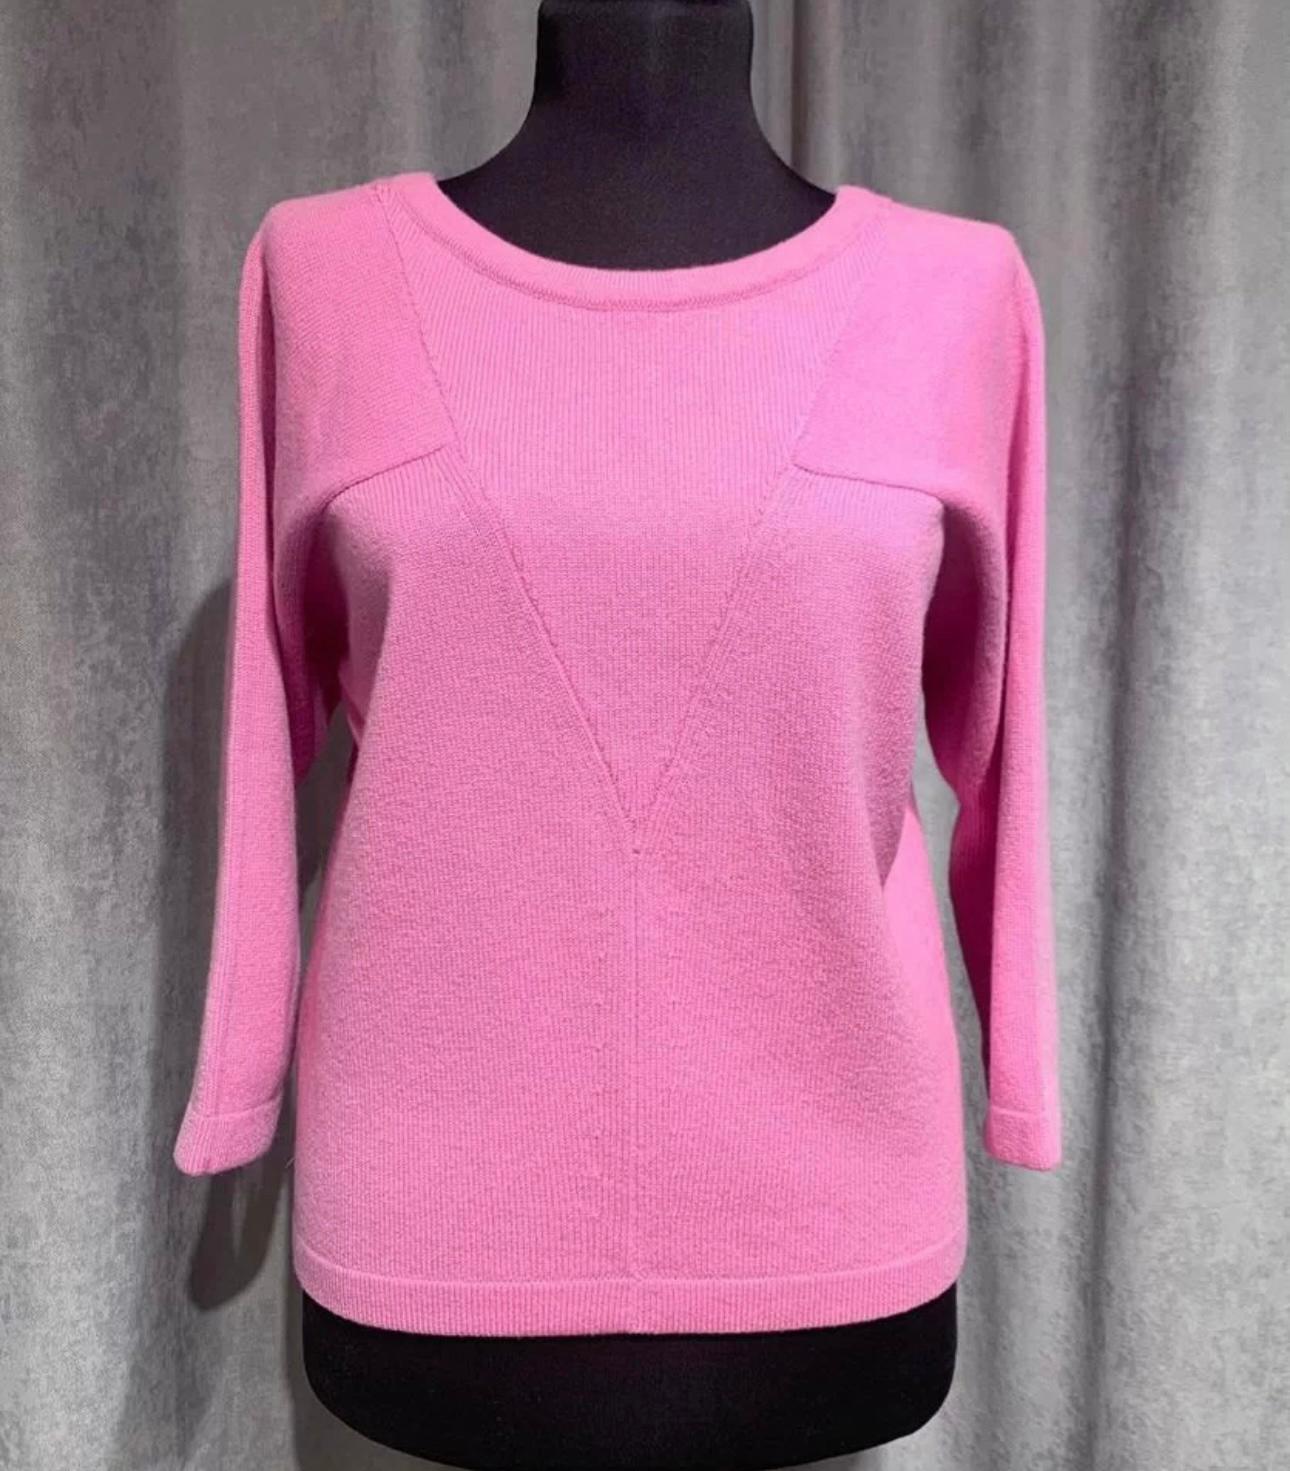 Chanel New CC Chain Link Hot Pink Cashmere Jumper 1